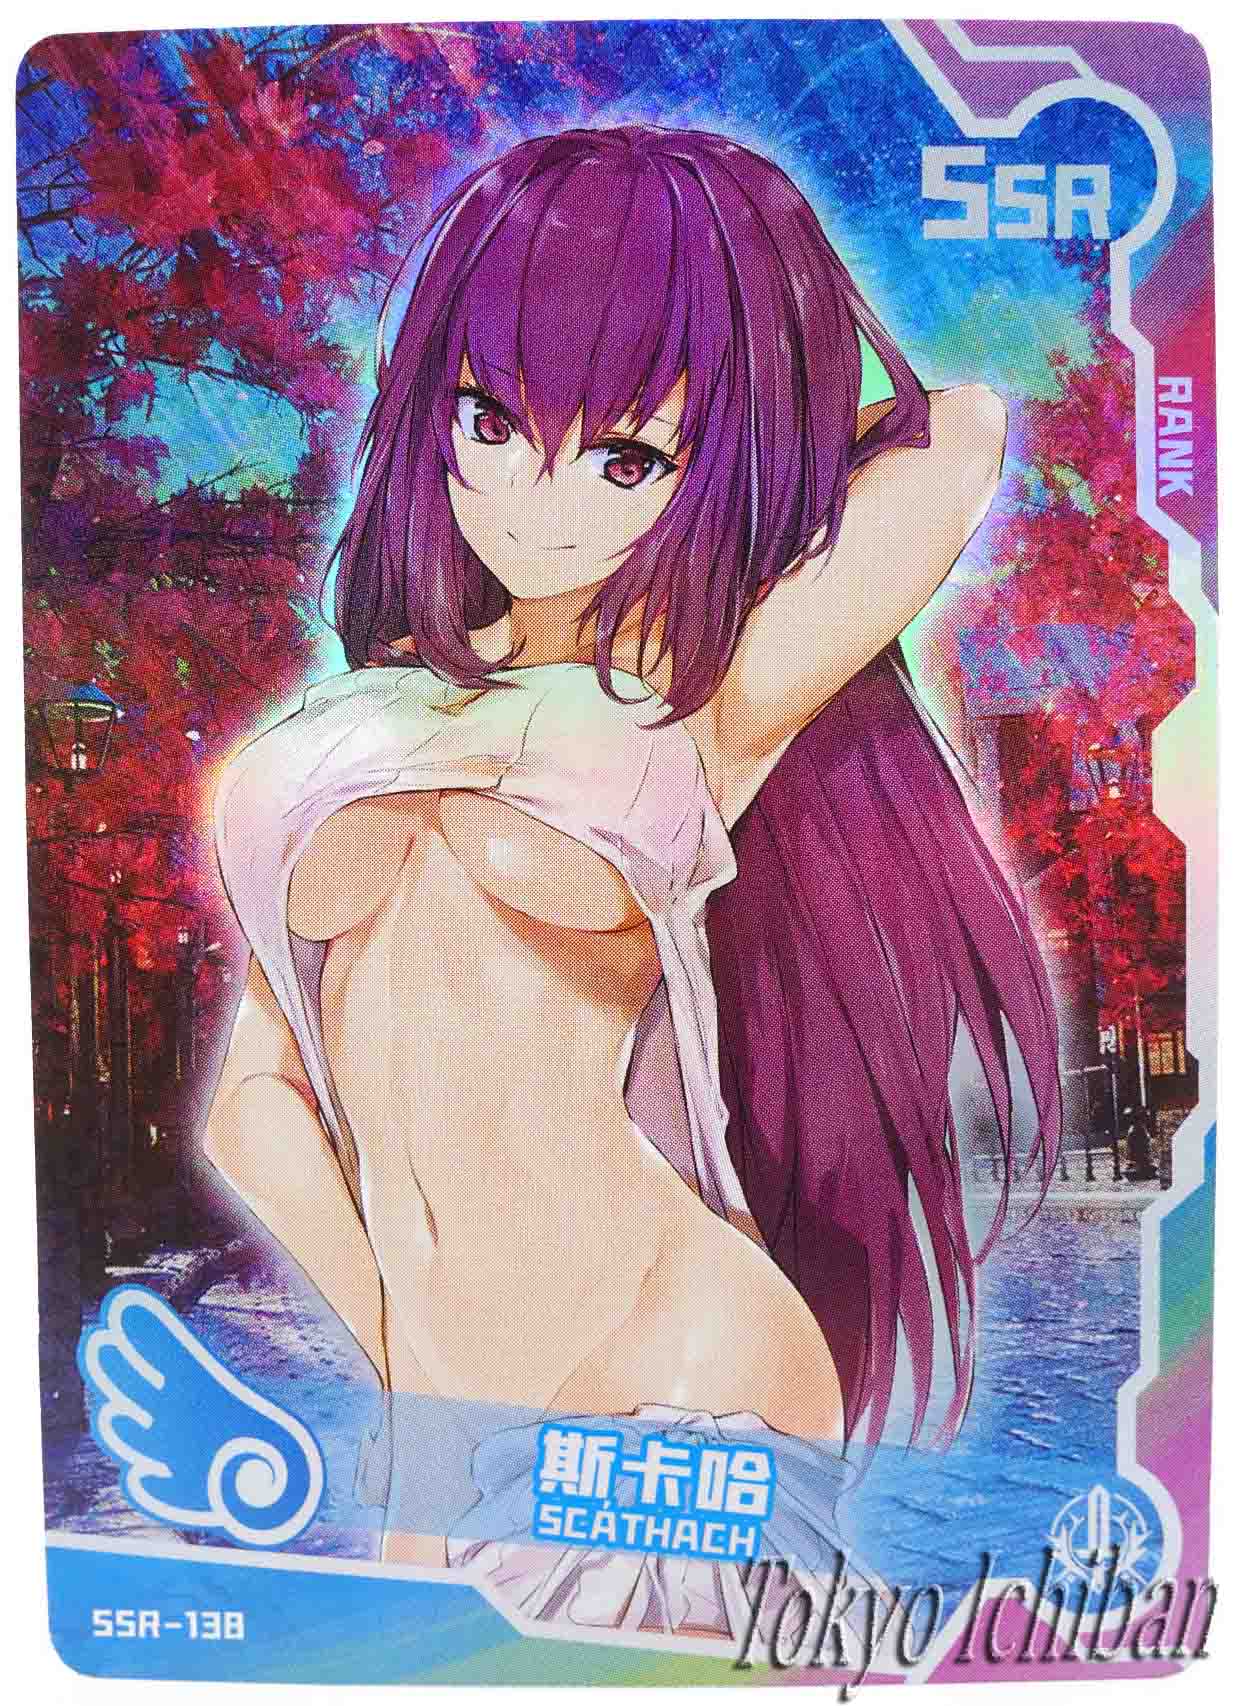 Doujin Card Fate Grand Order FGO Lancer Scathach SSR-138